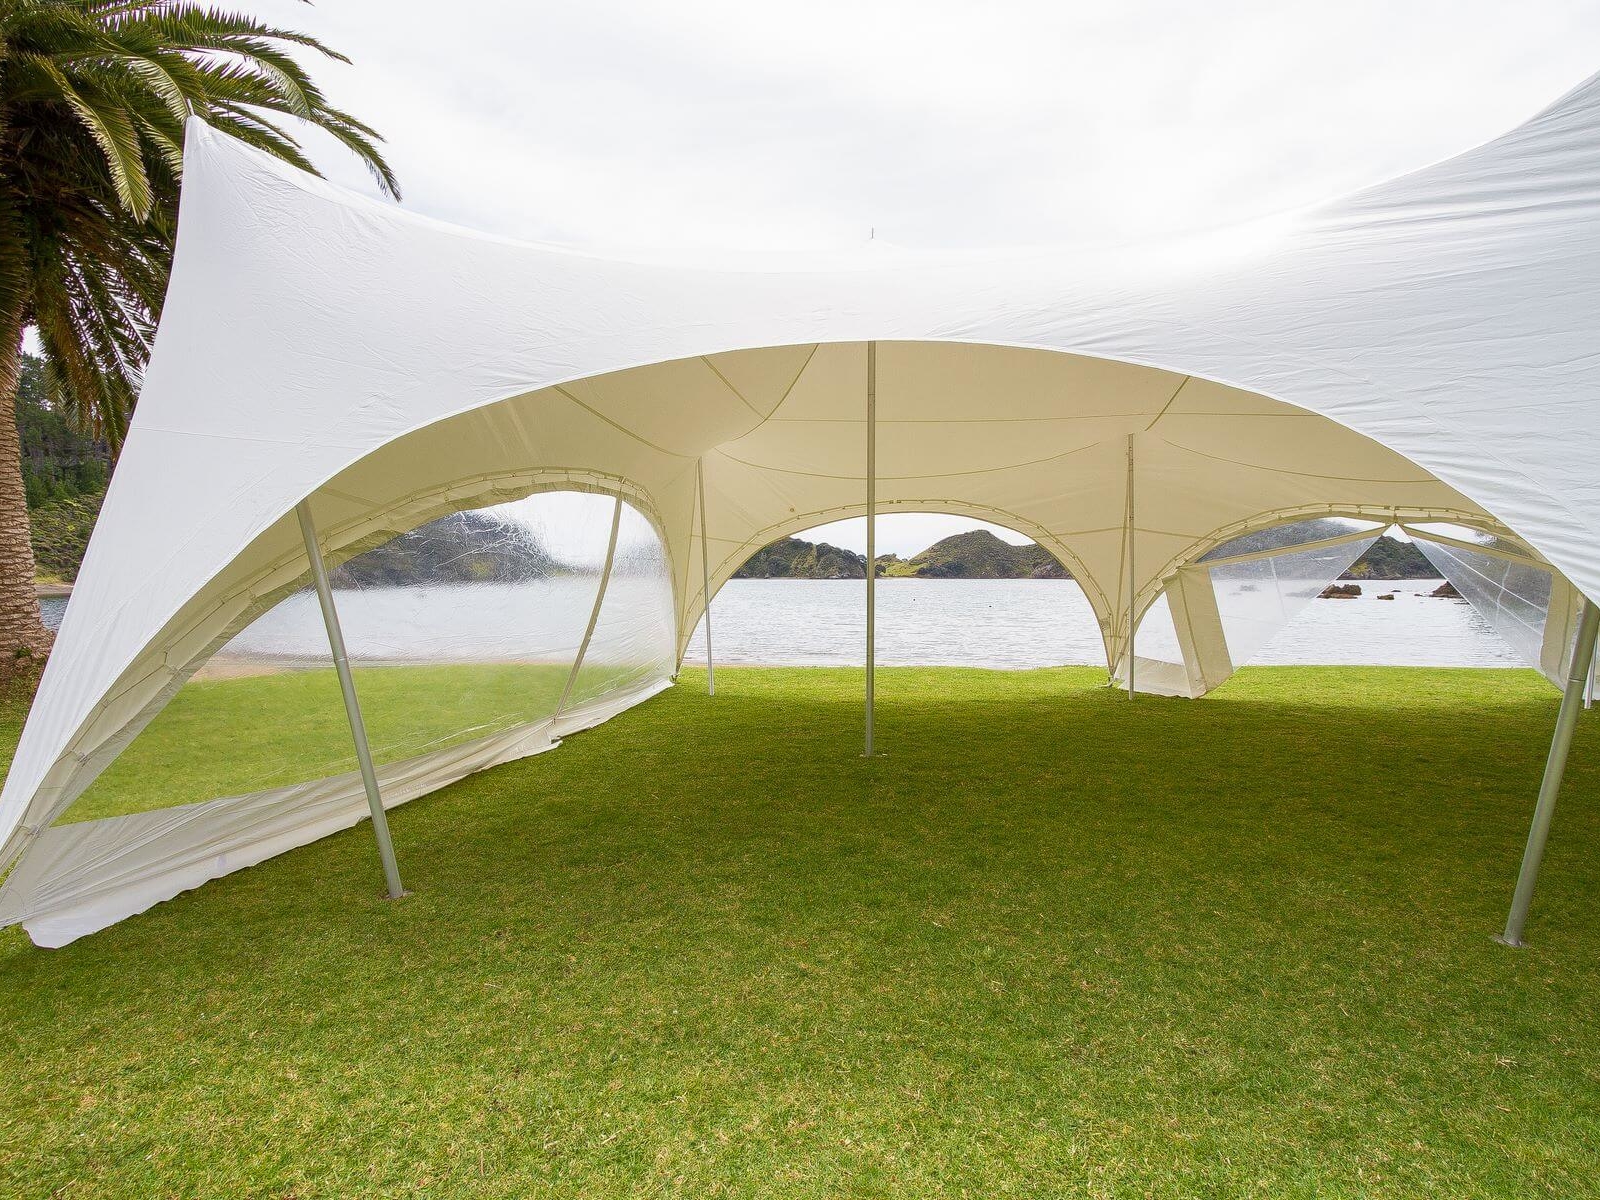 Marquee Sides for Wind Protection